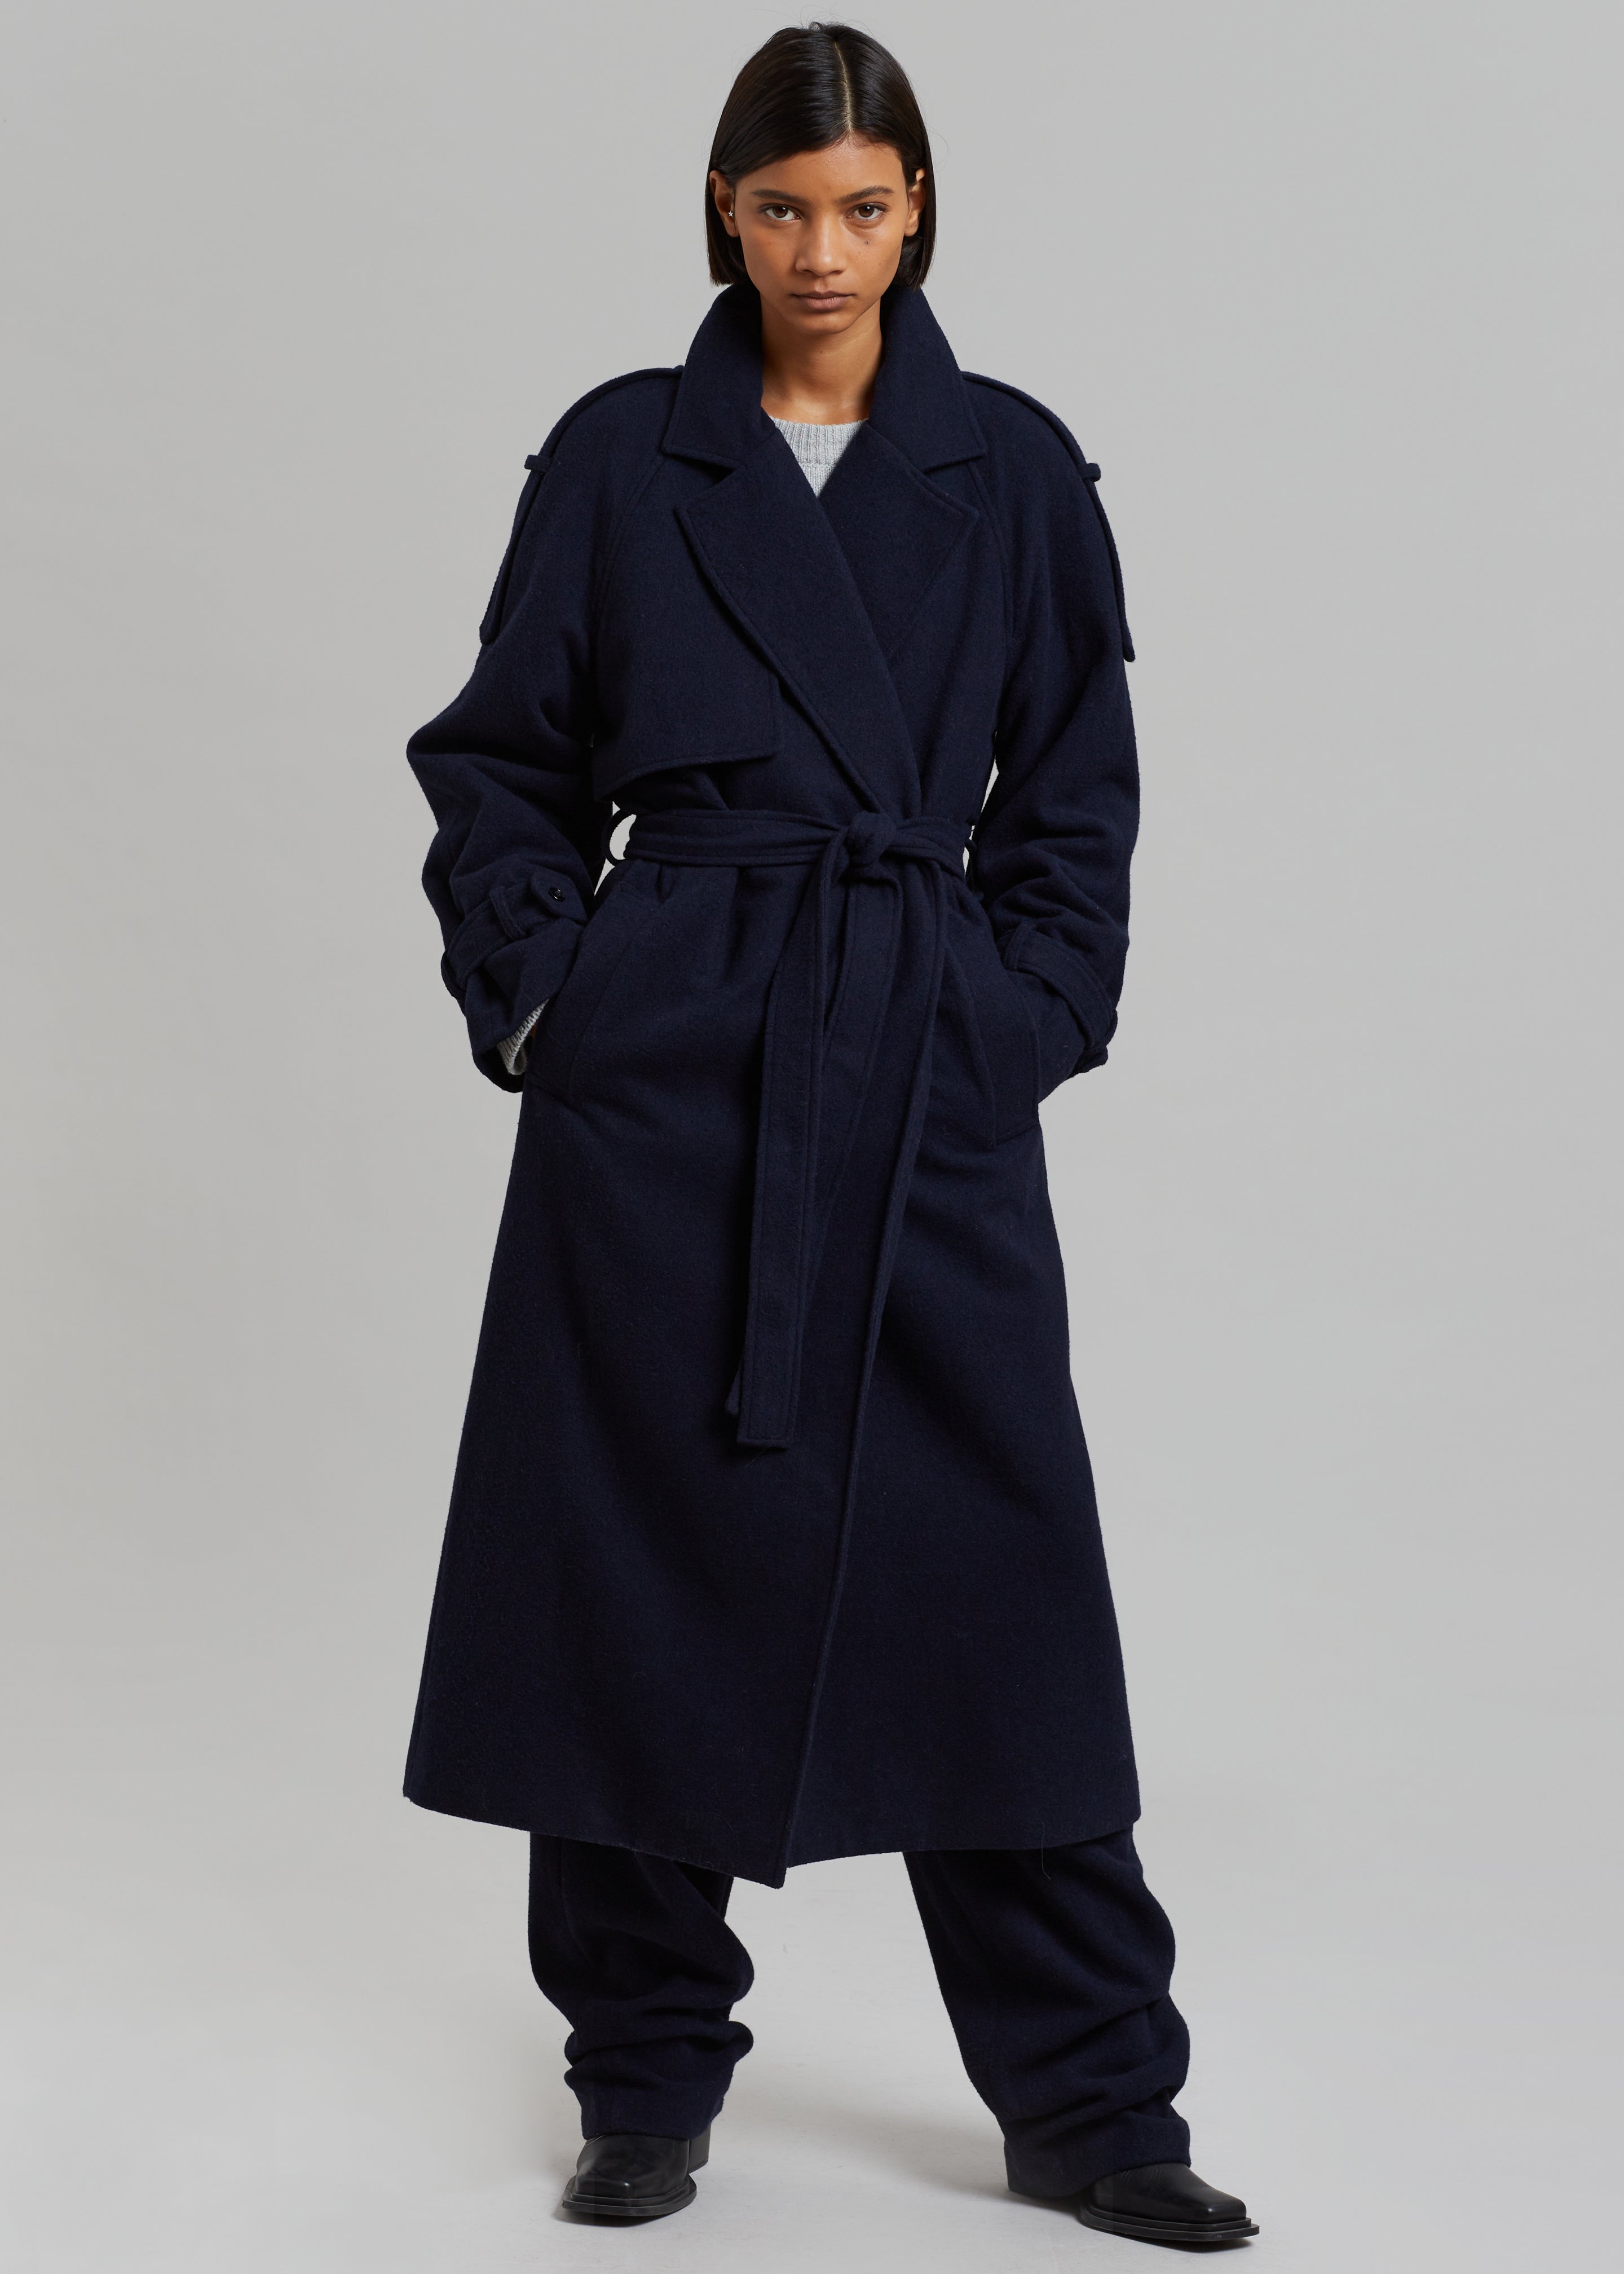 Suzanne Wool Trench Coat - Navy - 2